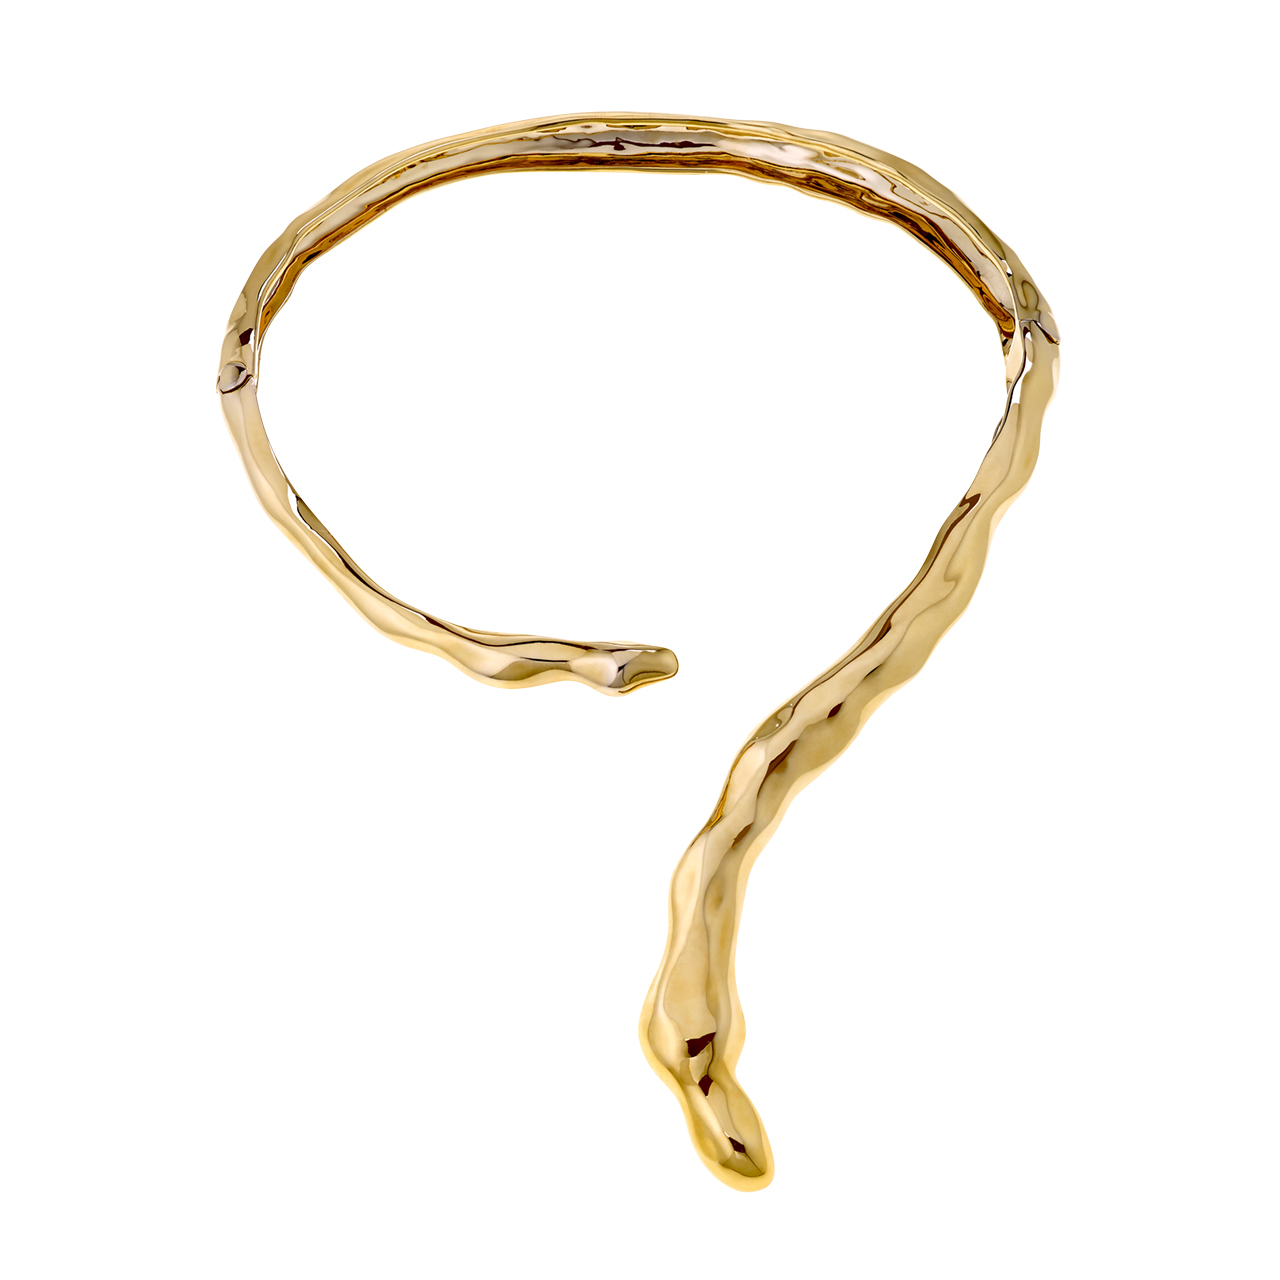 Copy of Kette / Necklace in Gold